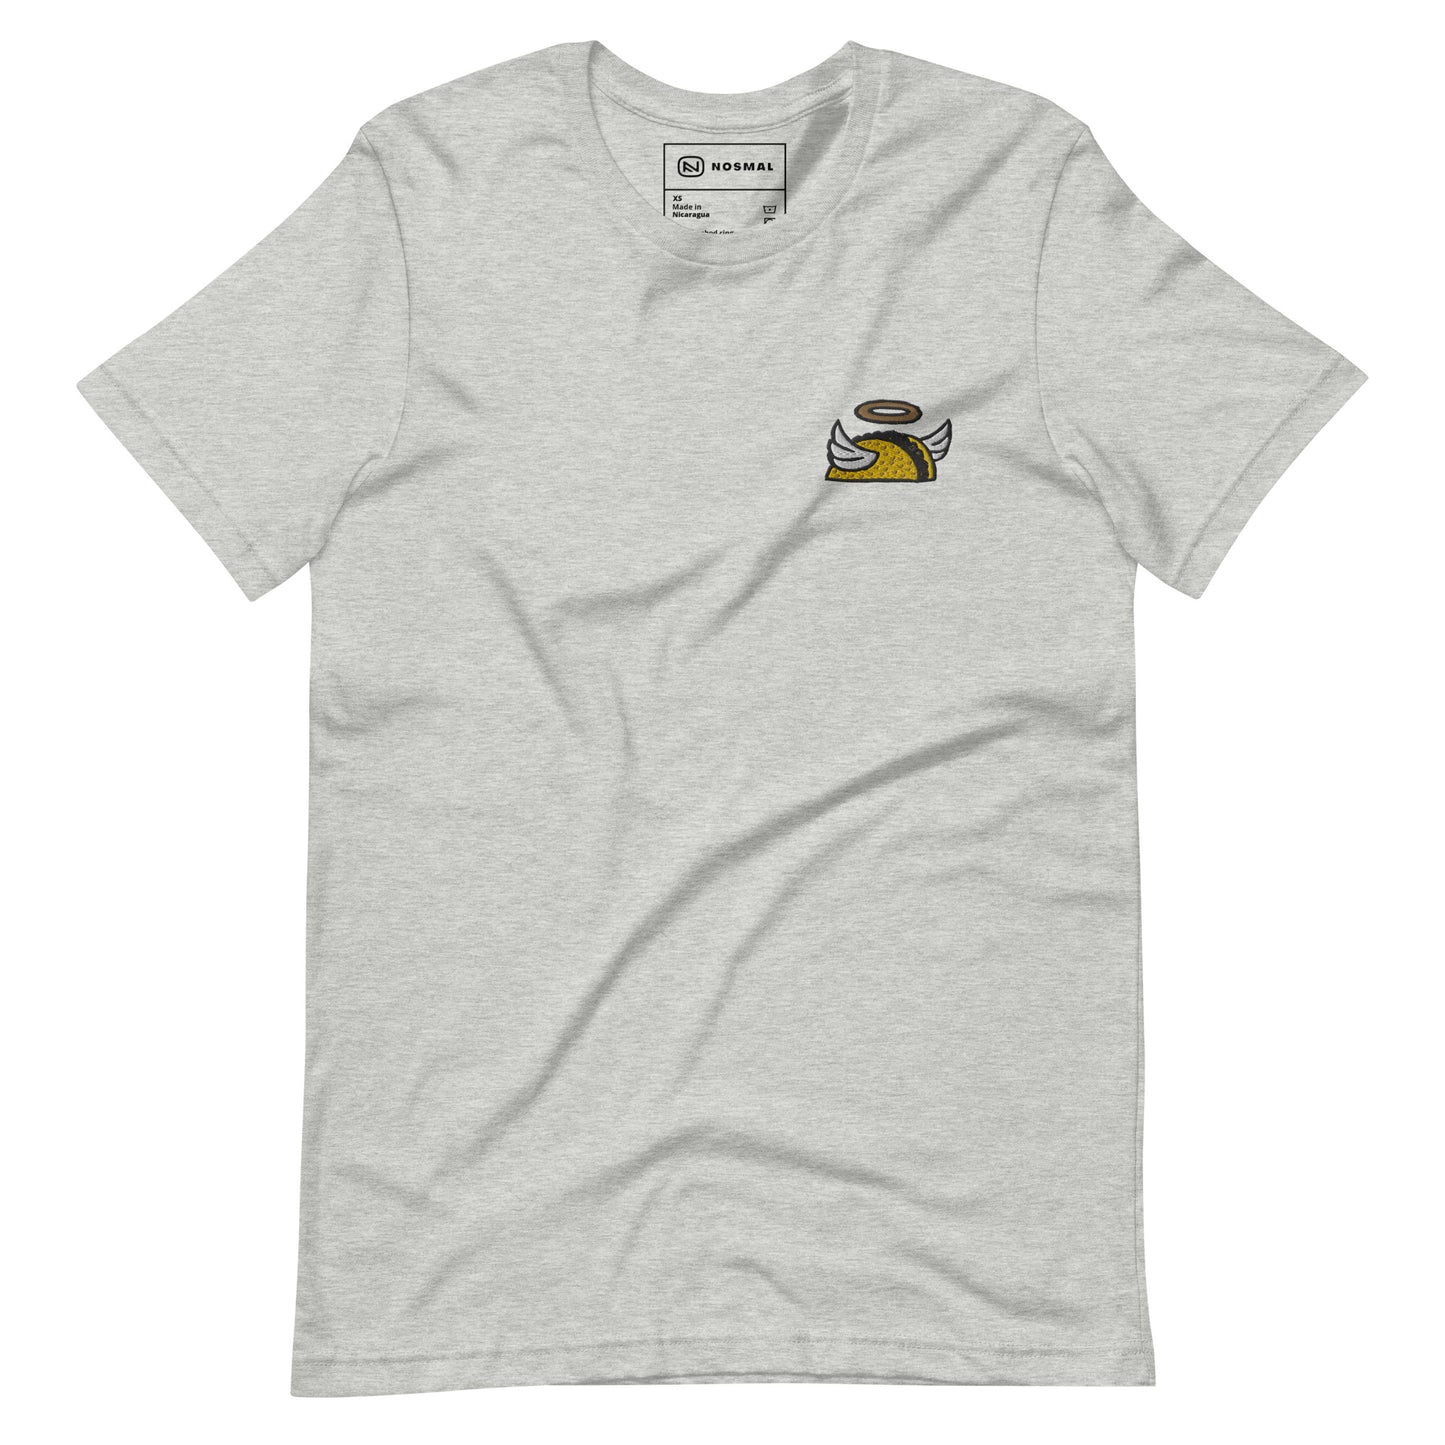 Straight on view of holy taco club embroidered design on heather athletic grey unisex t-shirt.